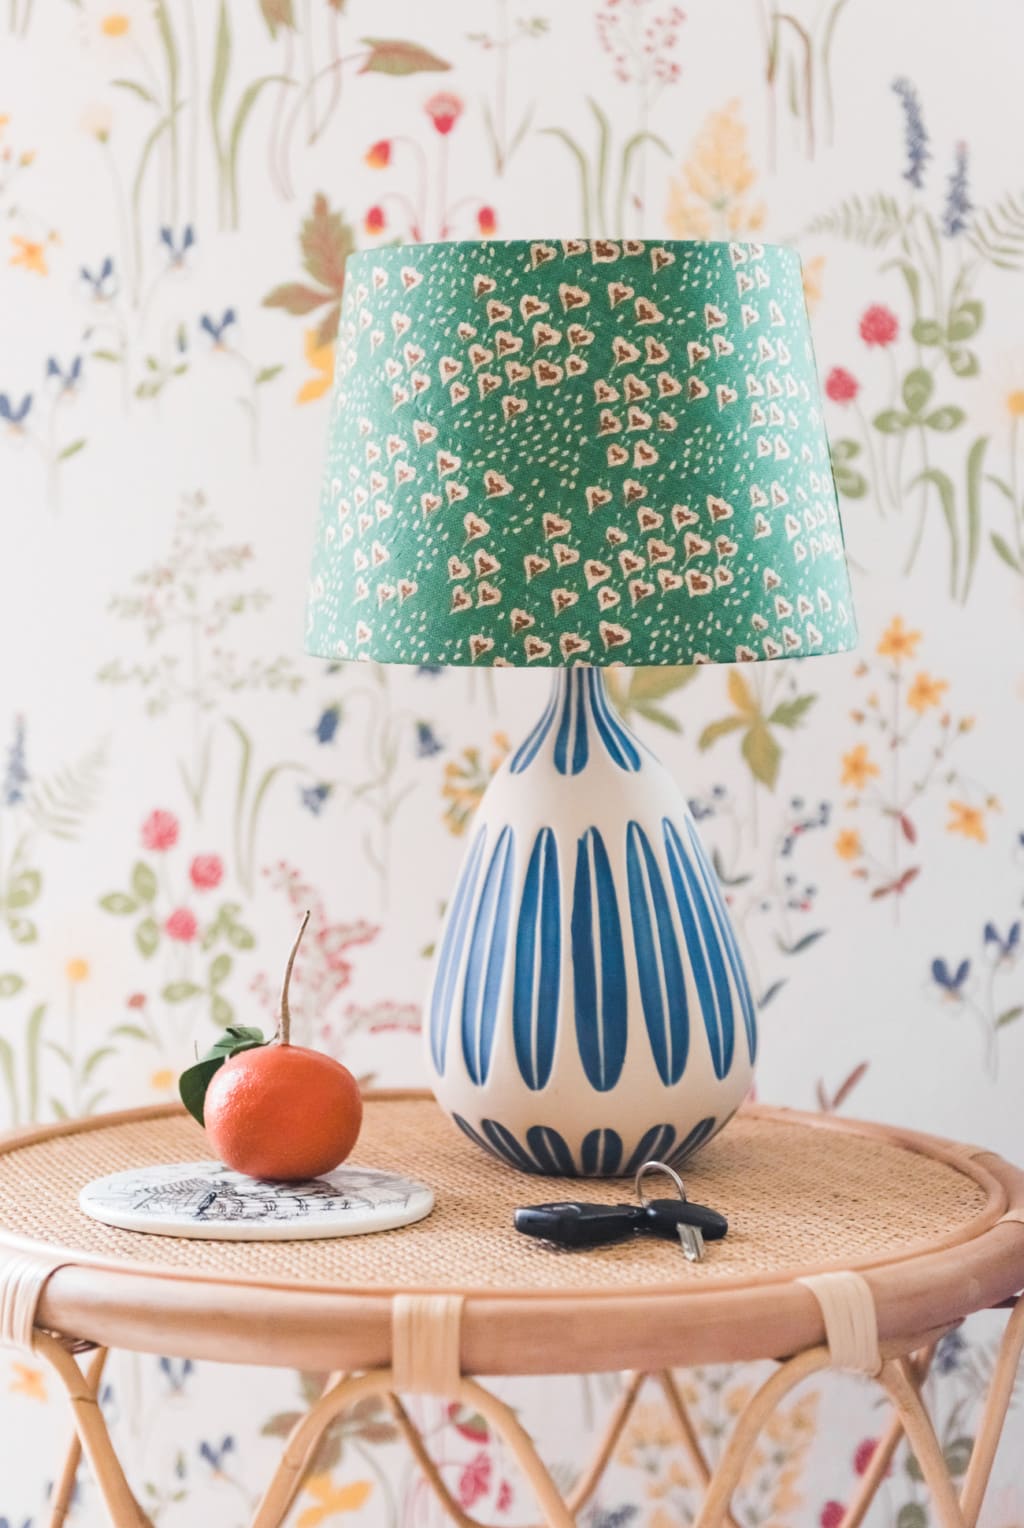 3 Diy Lampshades Made With Unexpected, How To Make A Lampshade Cover With Fabric